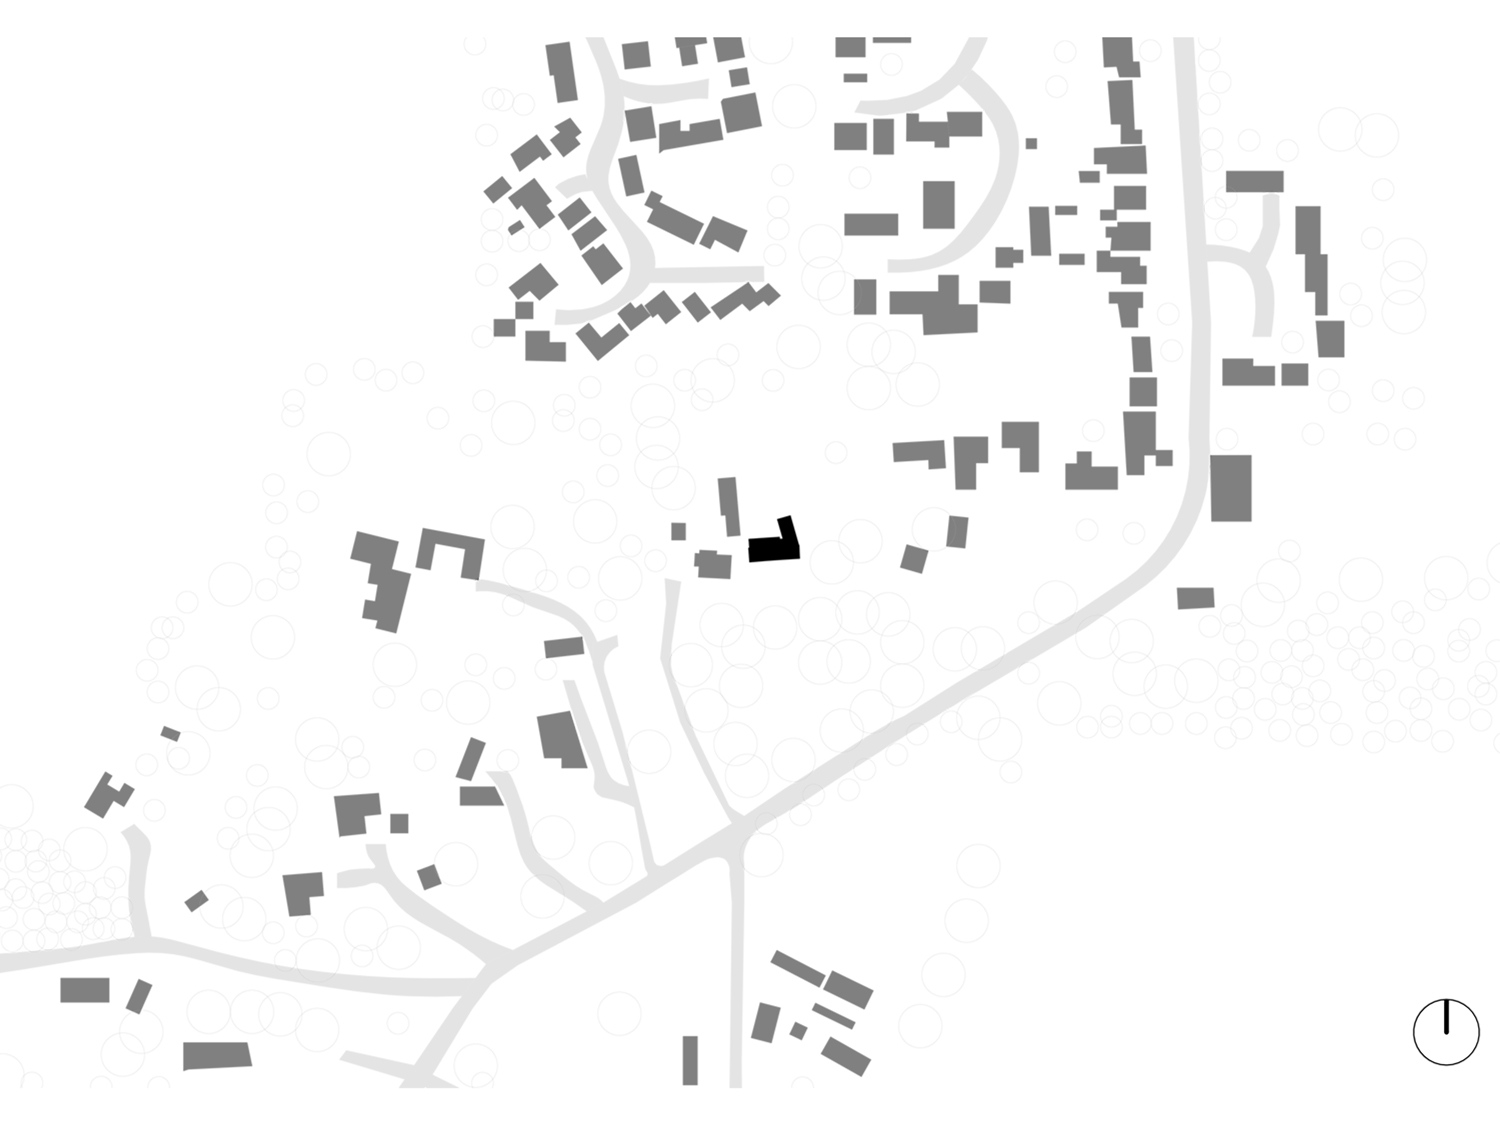 Location overview with surrounding areas